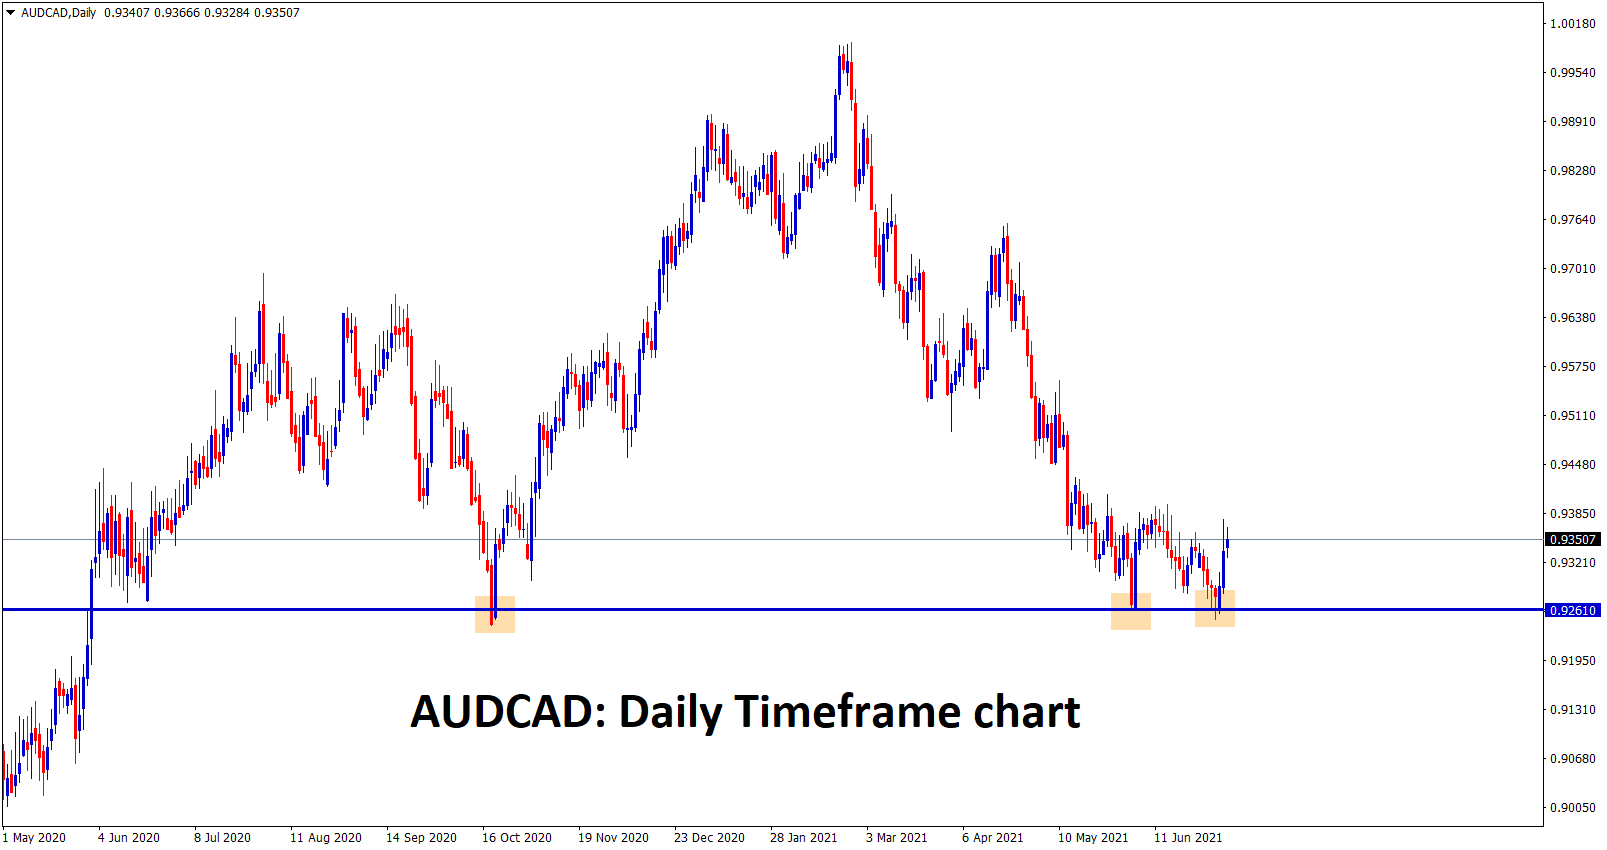 AUDCAD is bouncing up strongly from the important support area